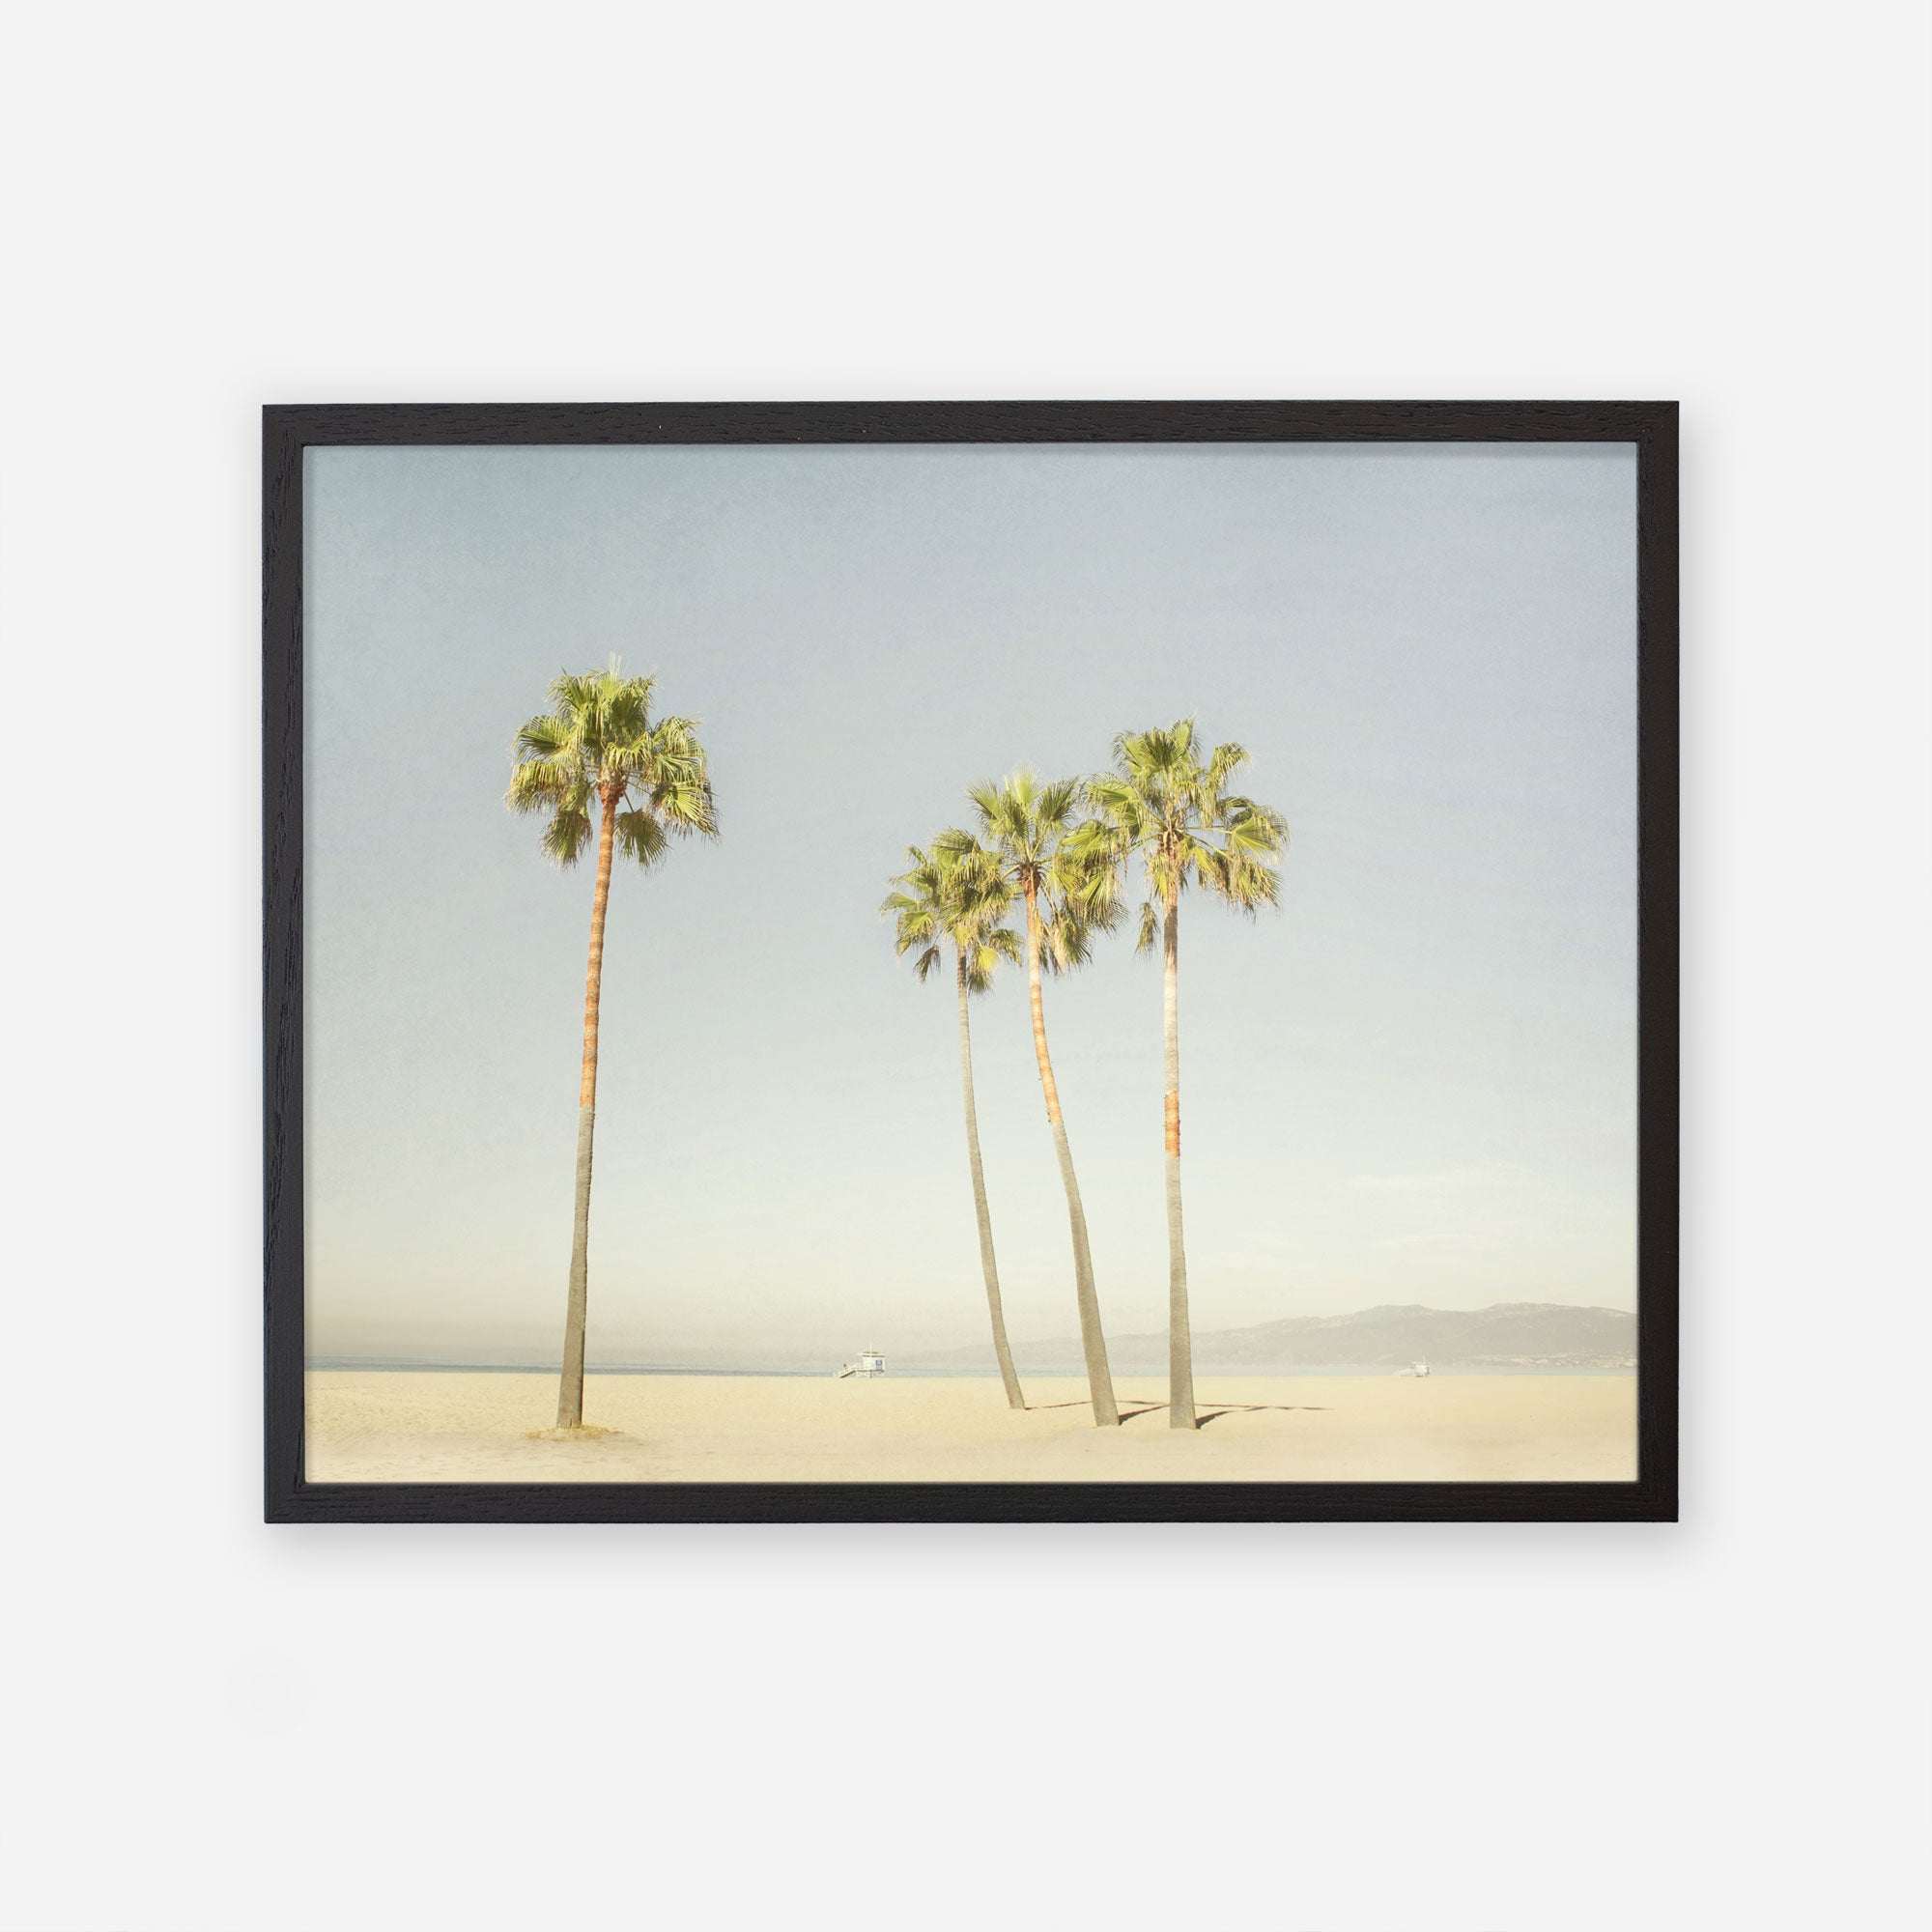 An unframed artwork of four tall palm trees on a sandy beach against a clear sky, displayed on pure white archival photographic paper - Offley Green&#39;s California Venice Beach Print &#39;Boardwalk Palms&#39;.